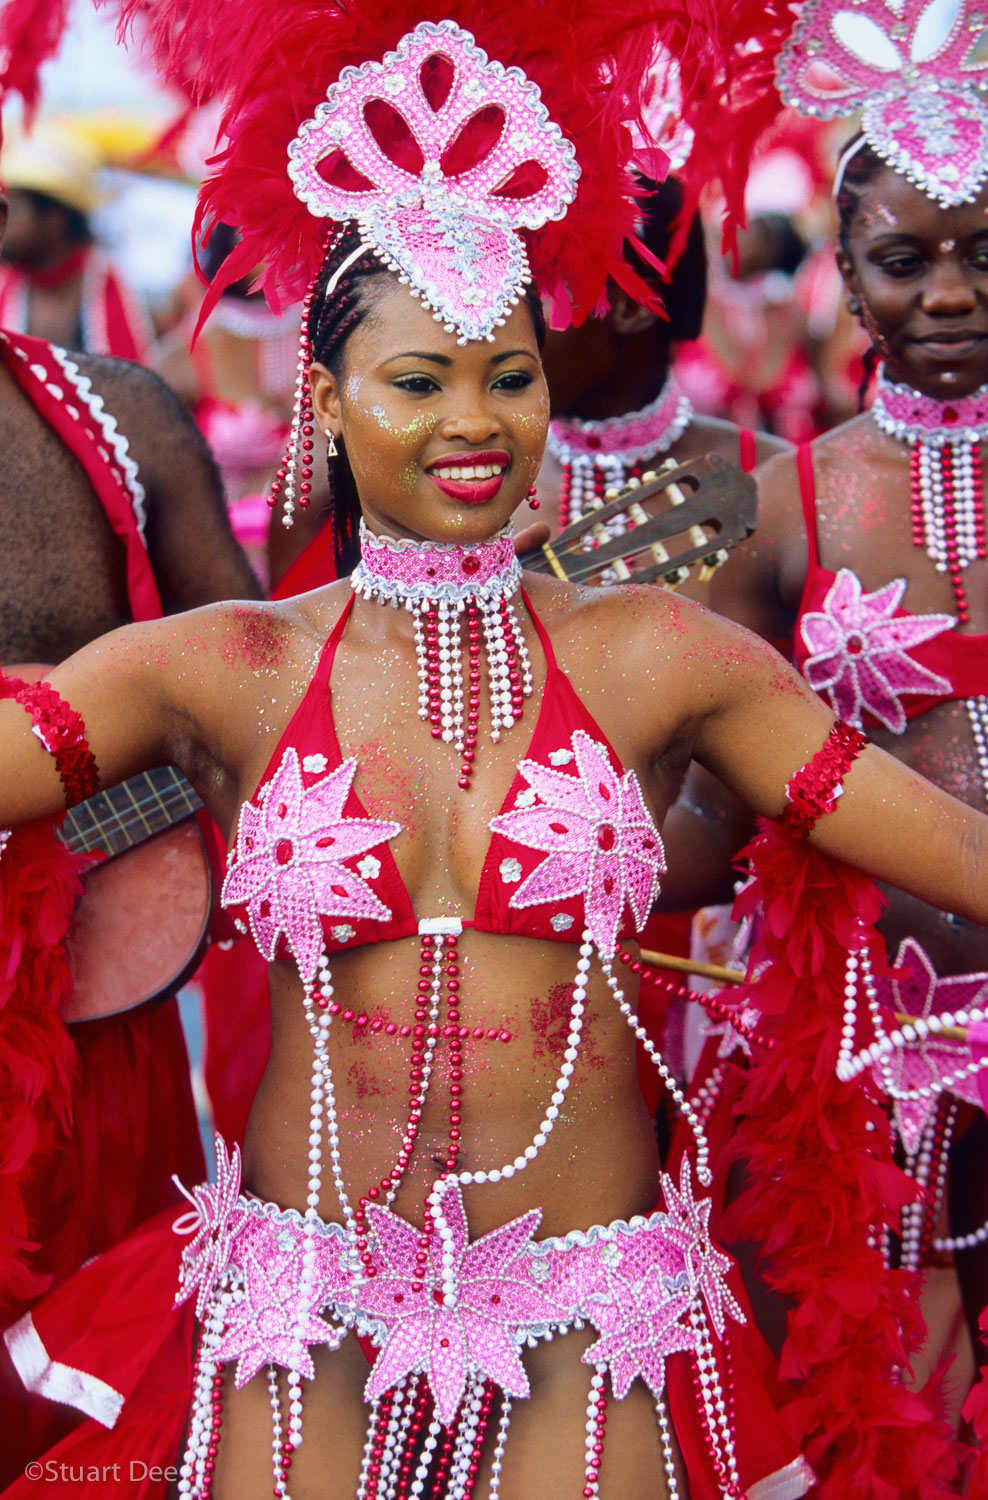  Close up of Carnival participant, Grand Kadooment, Crop Over Festival, Barbados. The Crop Over Festival is a Barbadian festival celebrating the end of the local sugar cane crop harvest, hence it's name. It is the major Festival of Barbados. During G